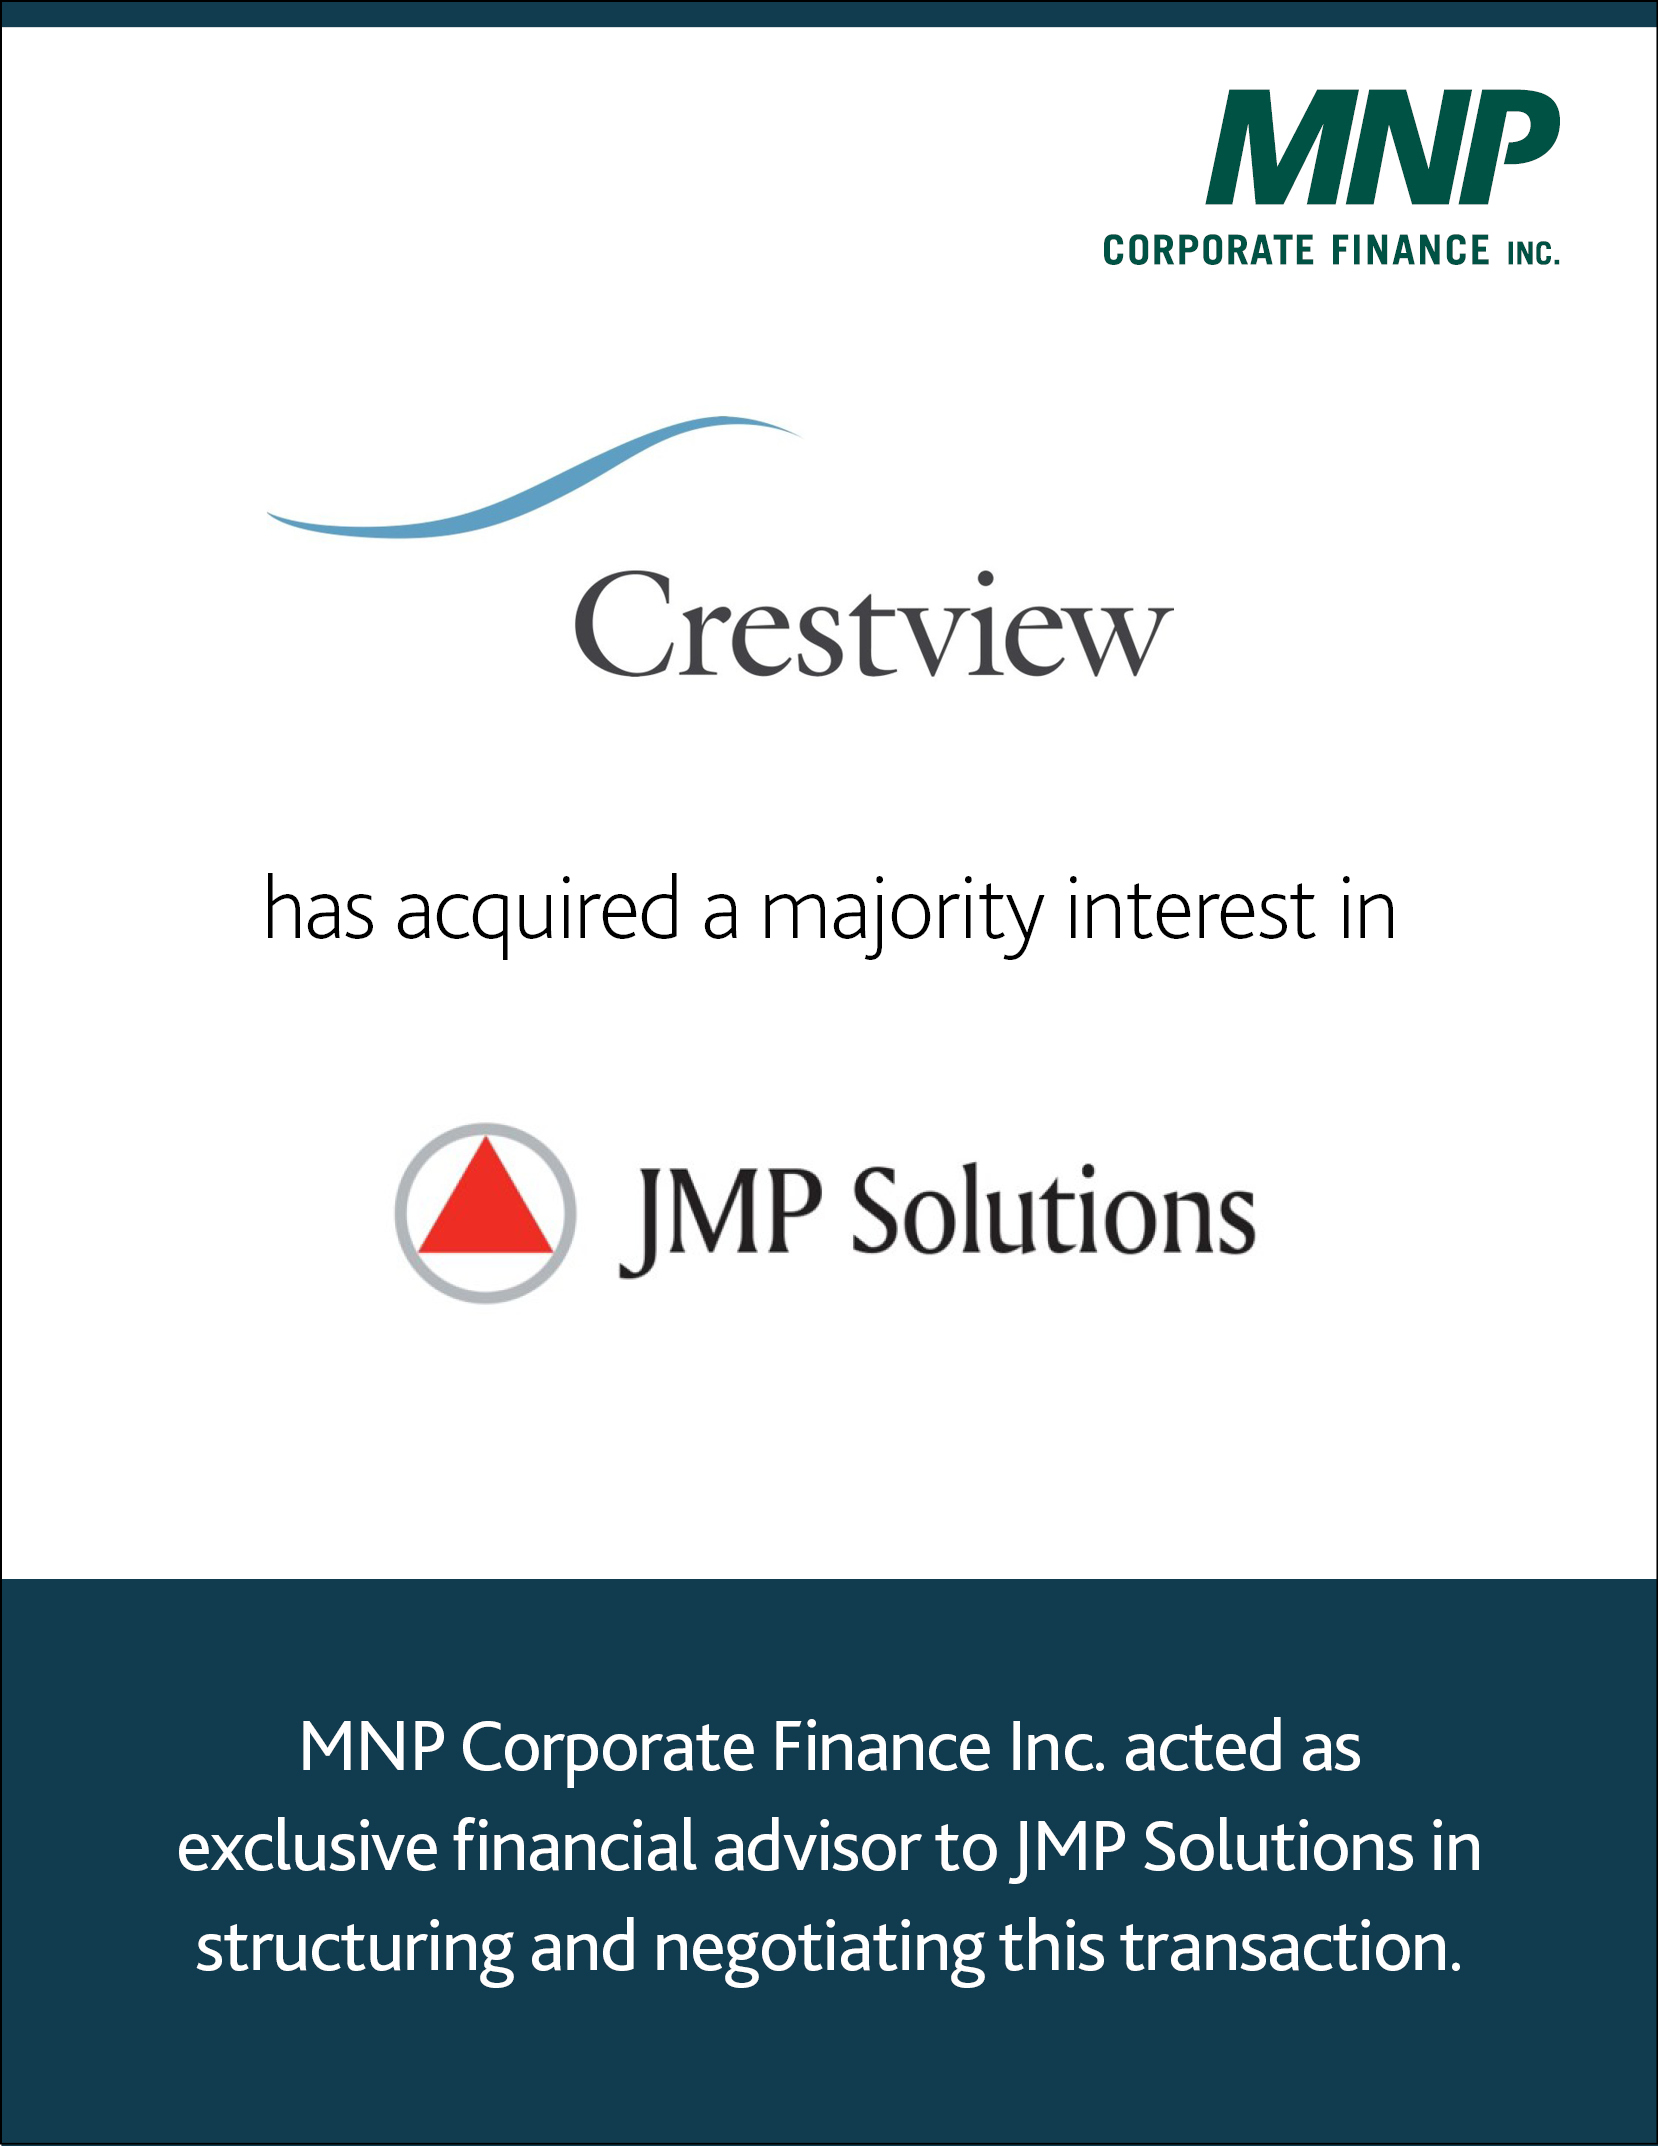 Crestview Partners has acquired a majority interest in JMP Solutions